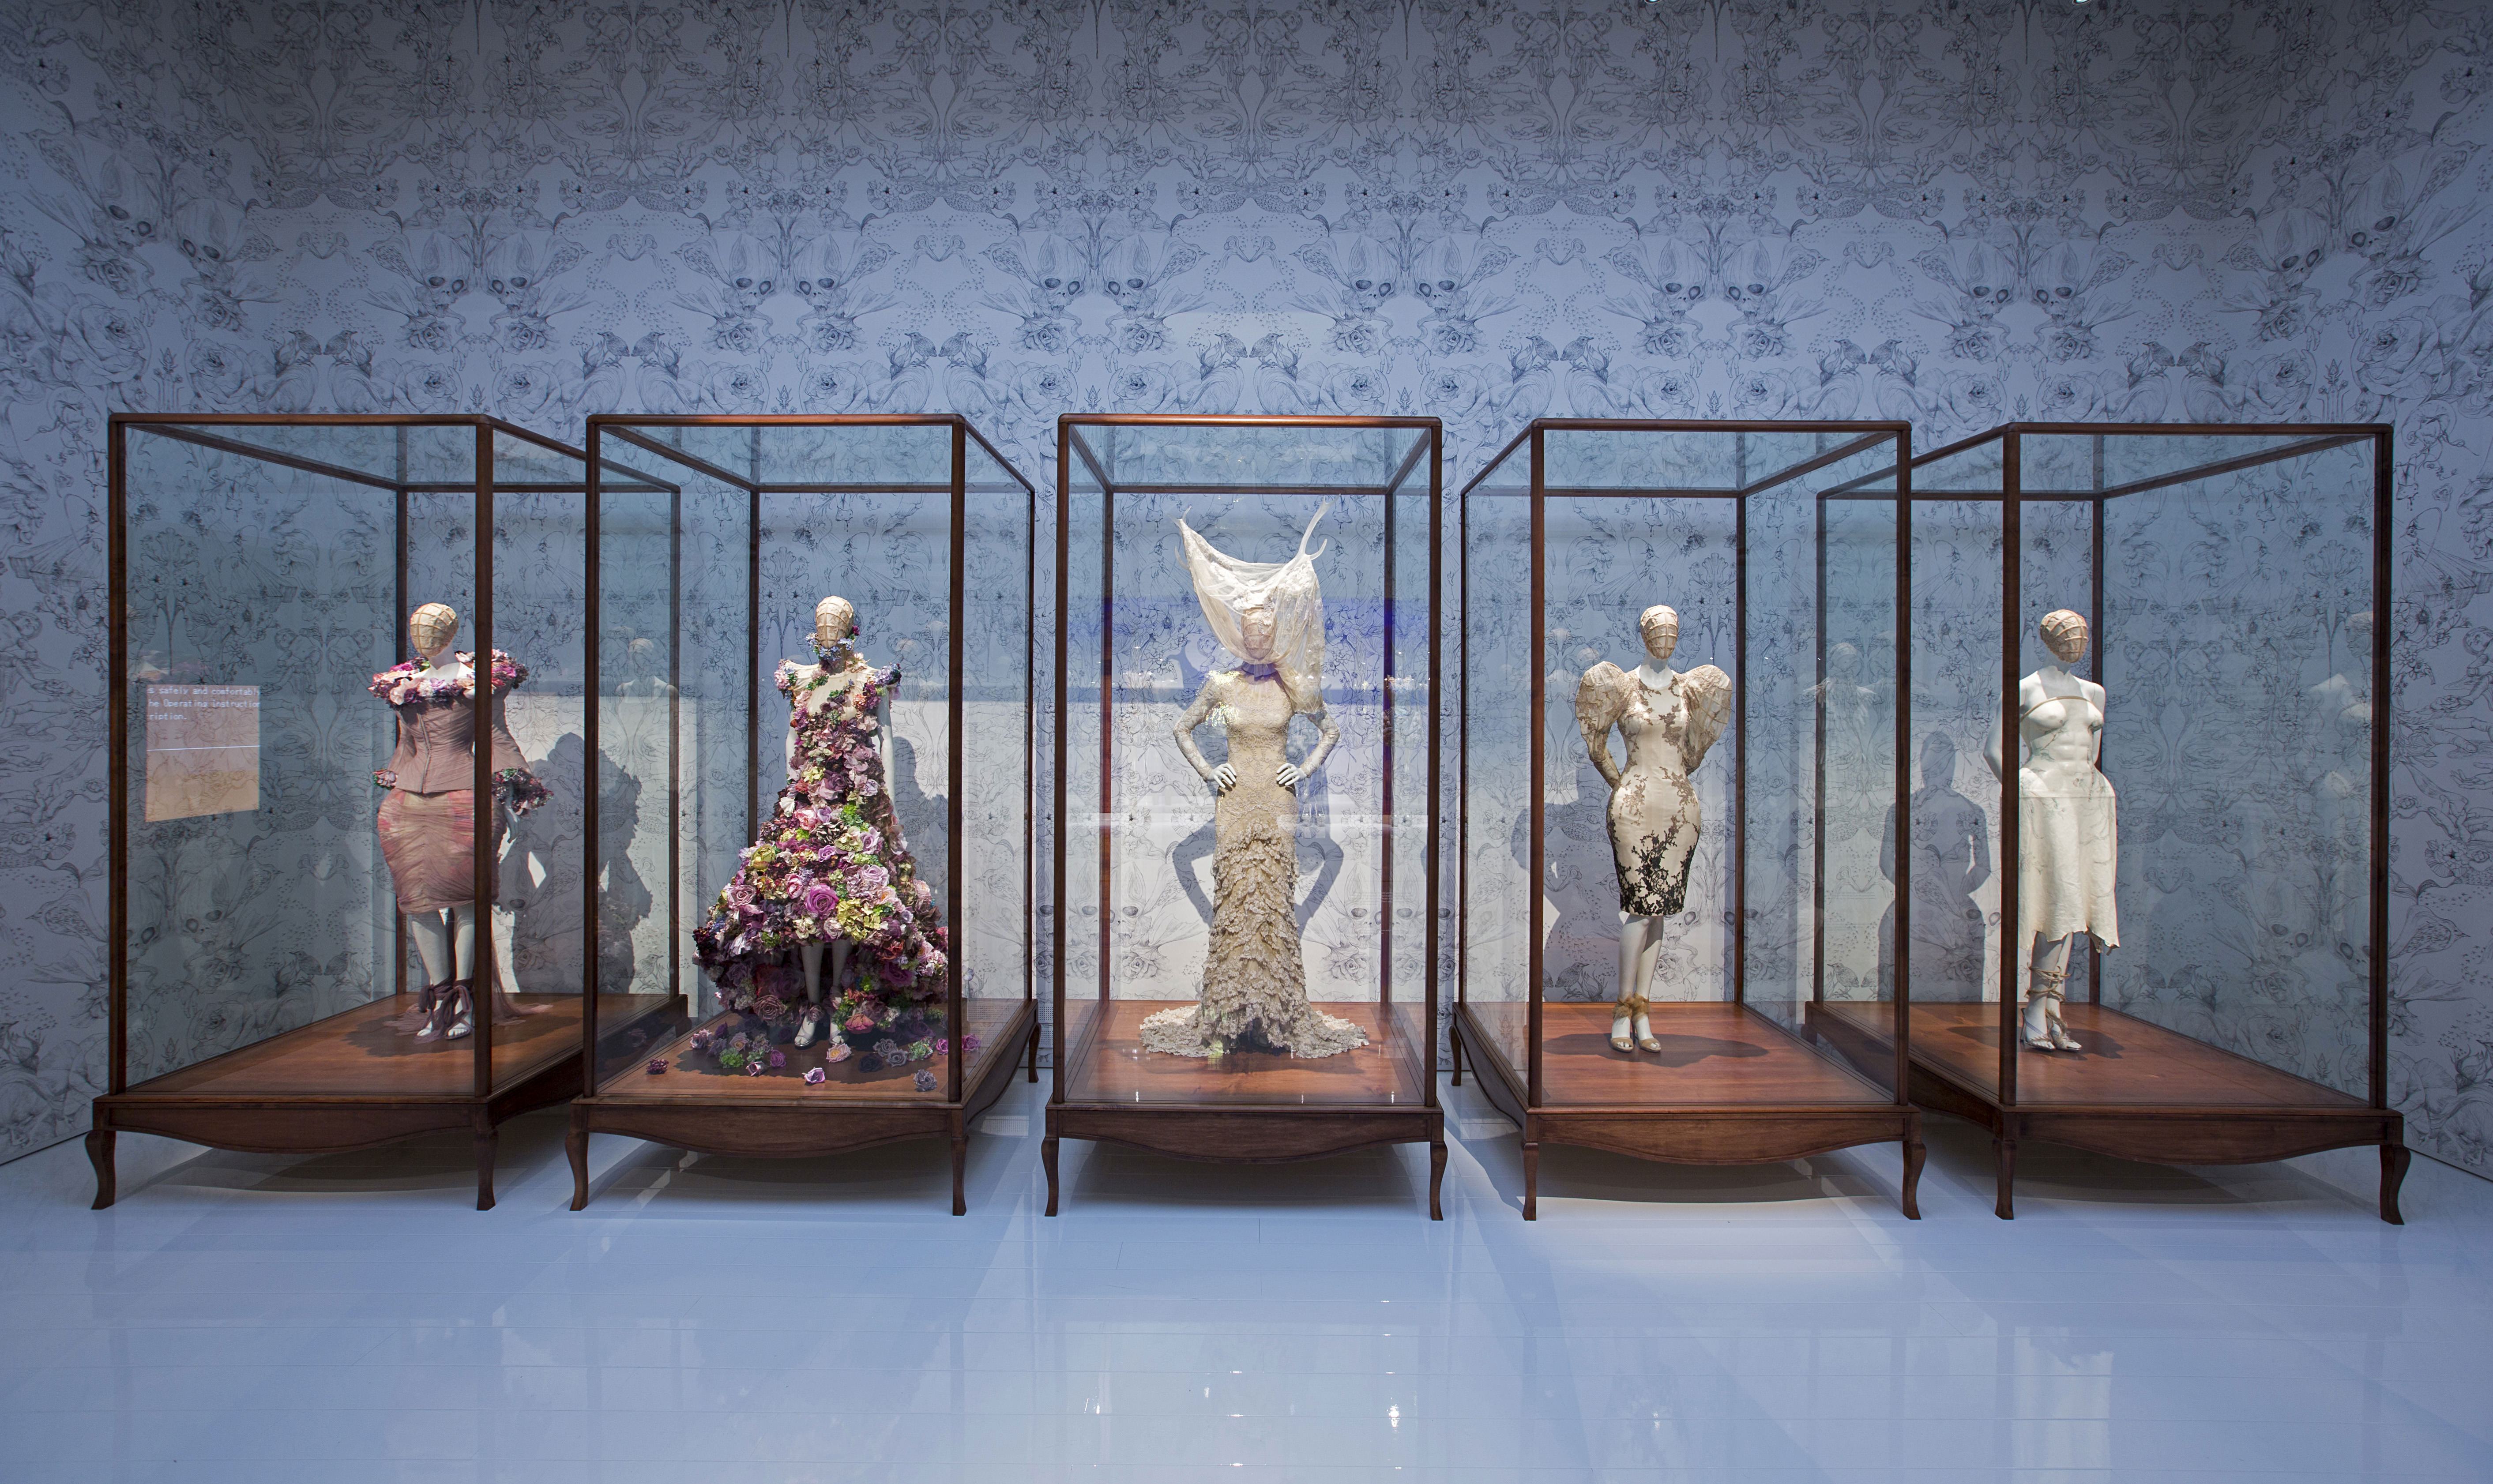 9._Installation_view_of_Romantic_Naturalism_gallery_Alexander_McQueen_Savage_Beauty_at_the_VA_c_Victoria_and_Albert_Museum_London